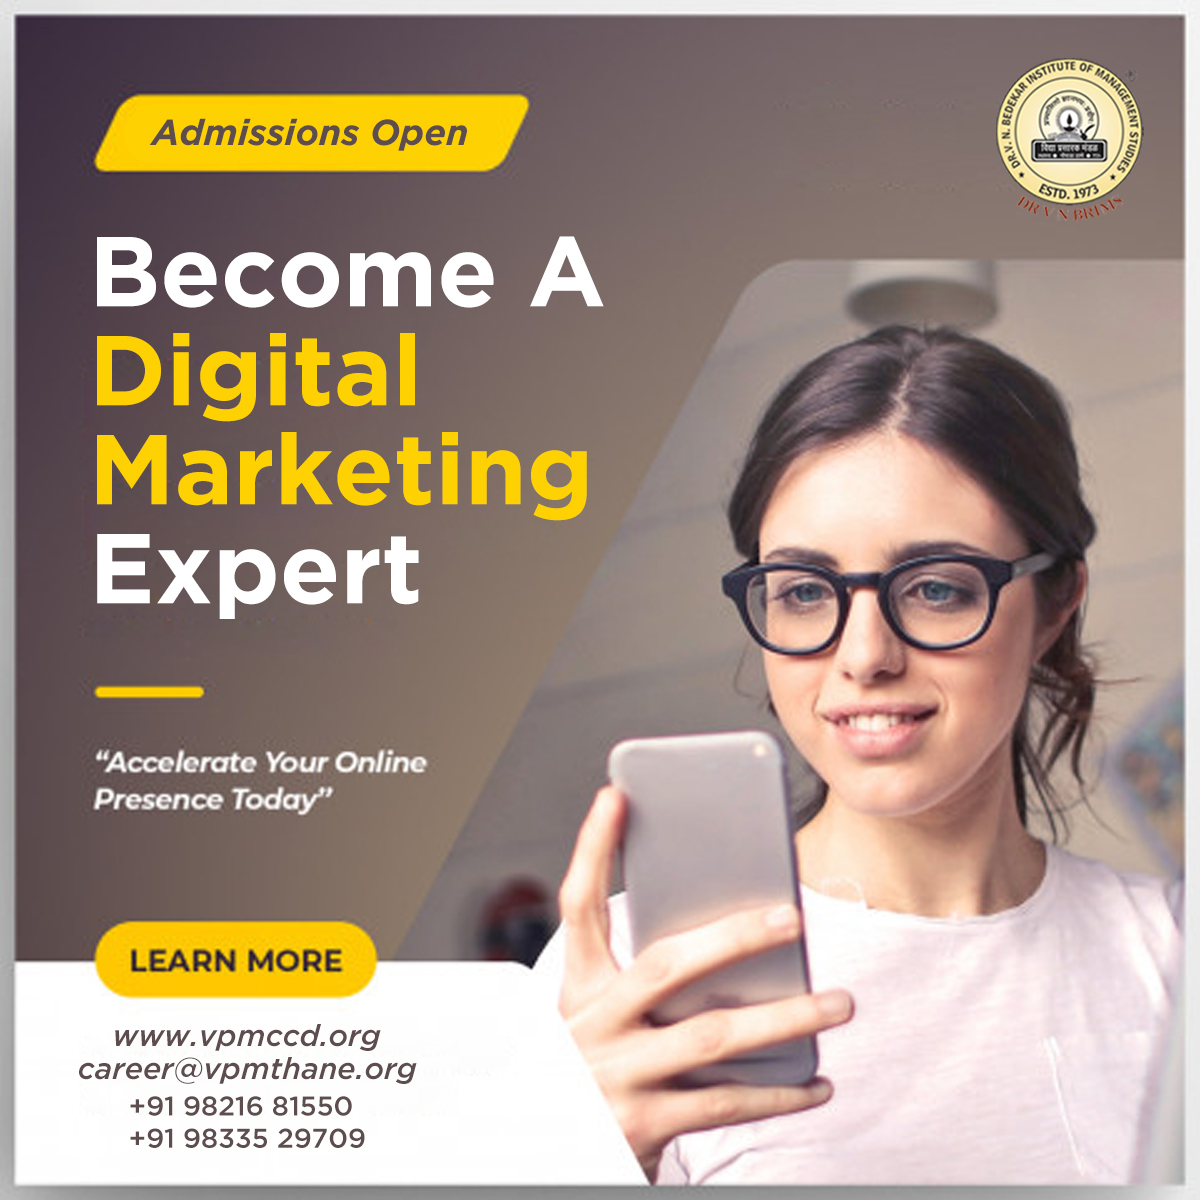 Join the Digital Marketing course and accelerate your online presence!
Register today!

vpmccd.org | career@vpmthane.org | Phone: +91 98216 81550 / +91 98335 29709

#VNBRIMS #VPMCCD #DigitalMarketing #OnlineMarketing #InternetMarketing #CareerInMarketing